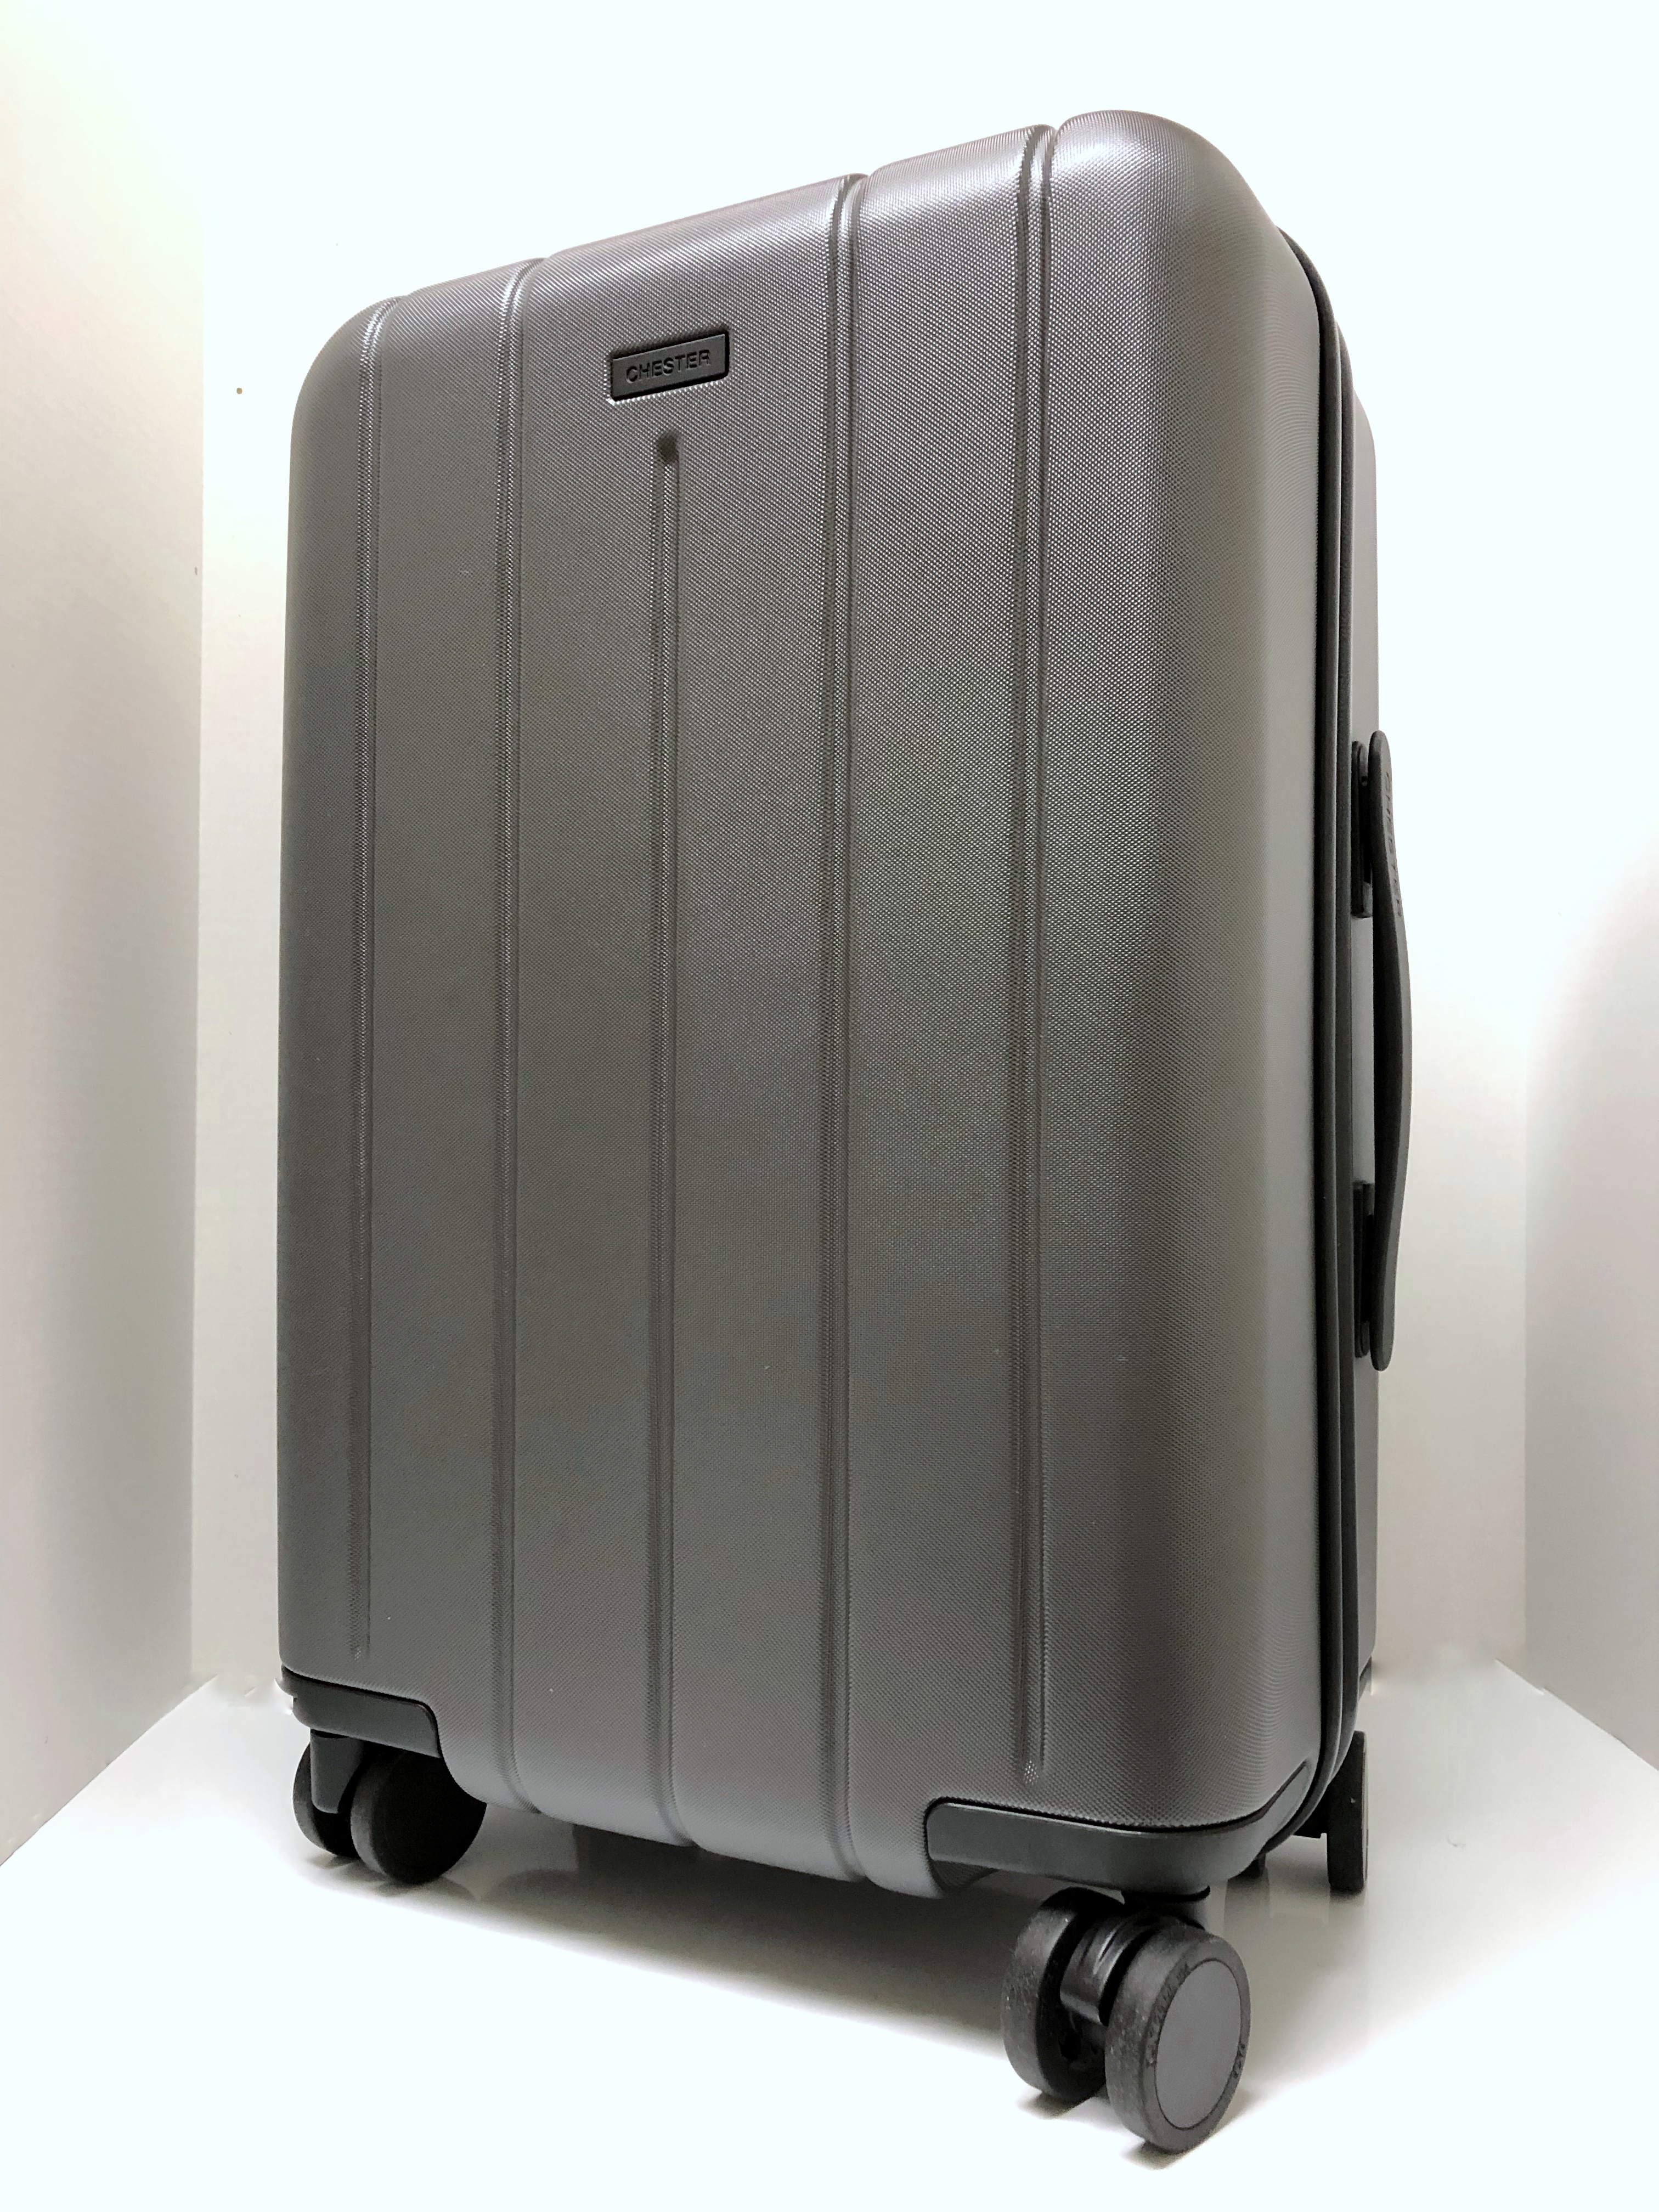 Exterior of Minimia by Chester suitcase carry on